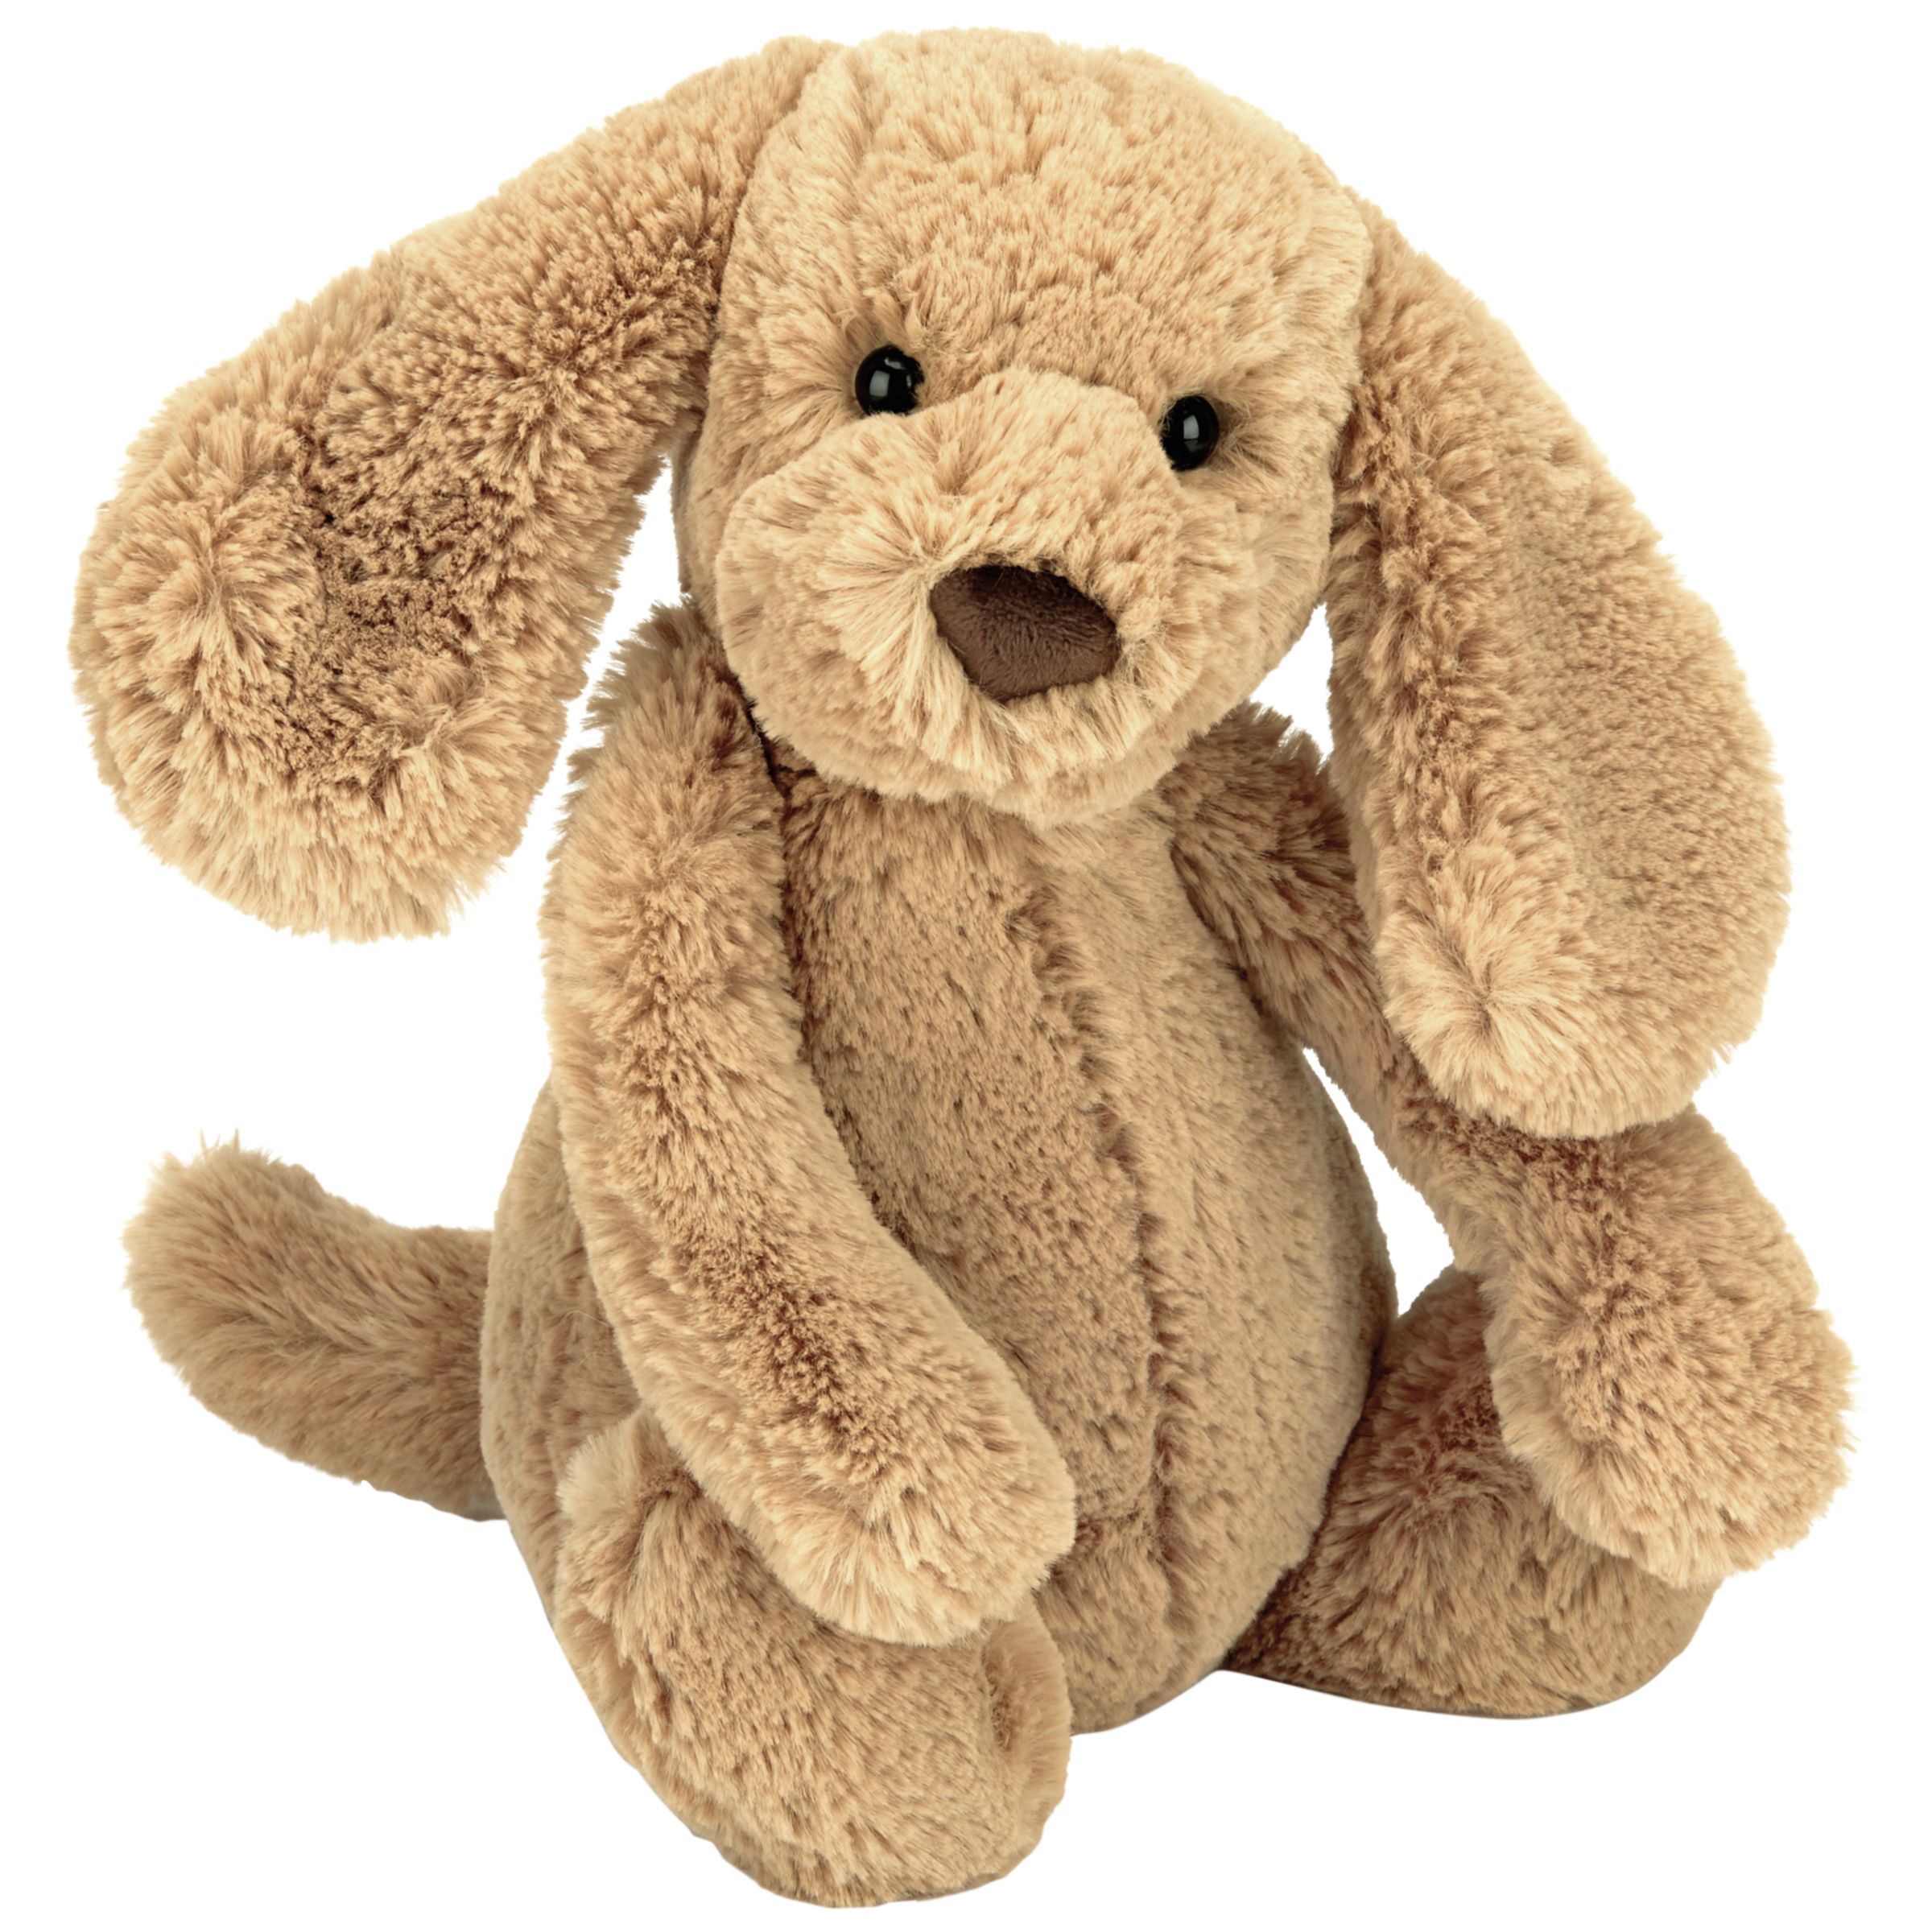 where can i buy jellycat stuffed animals